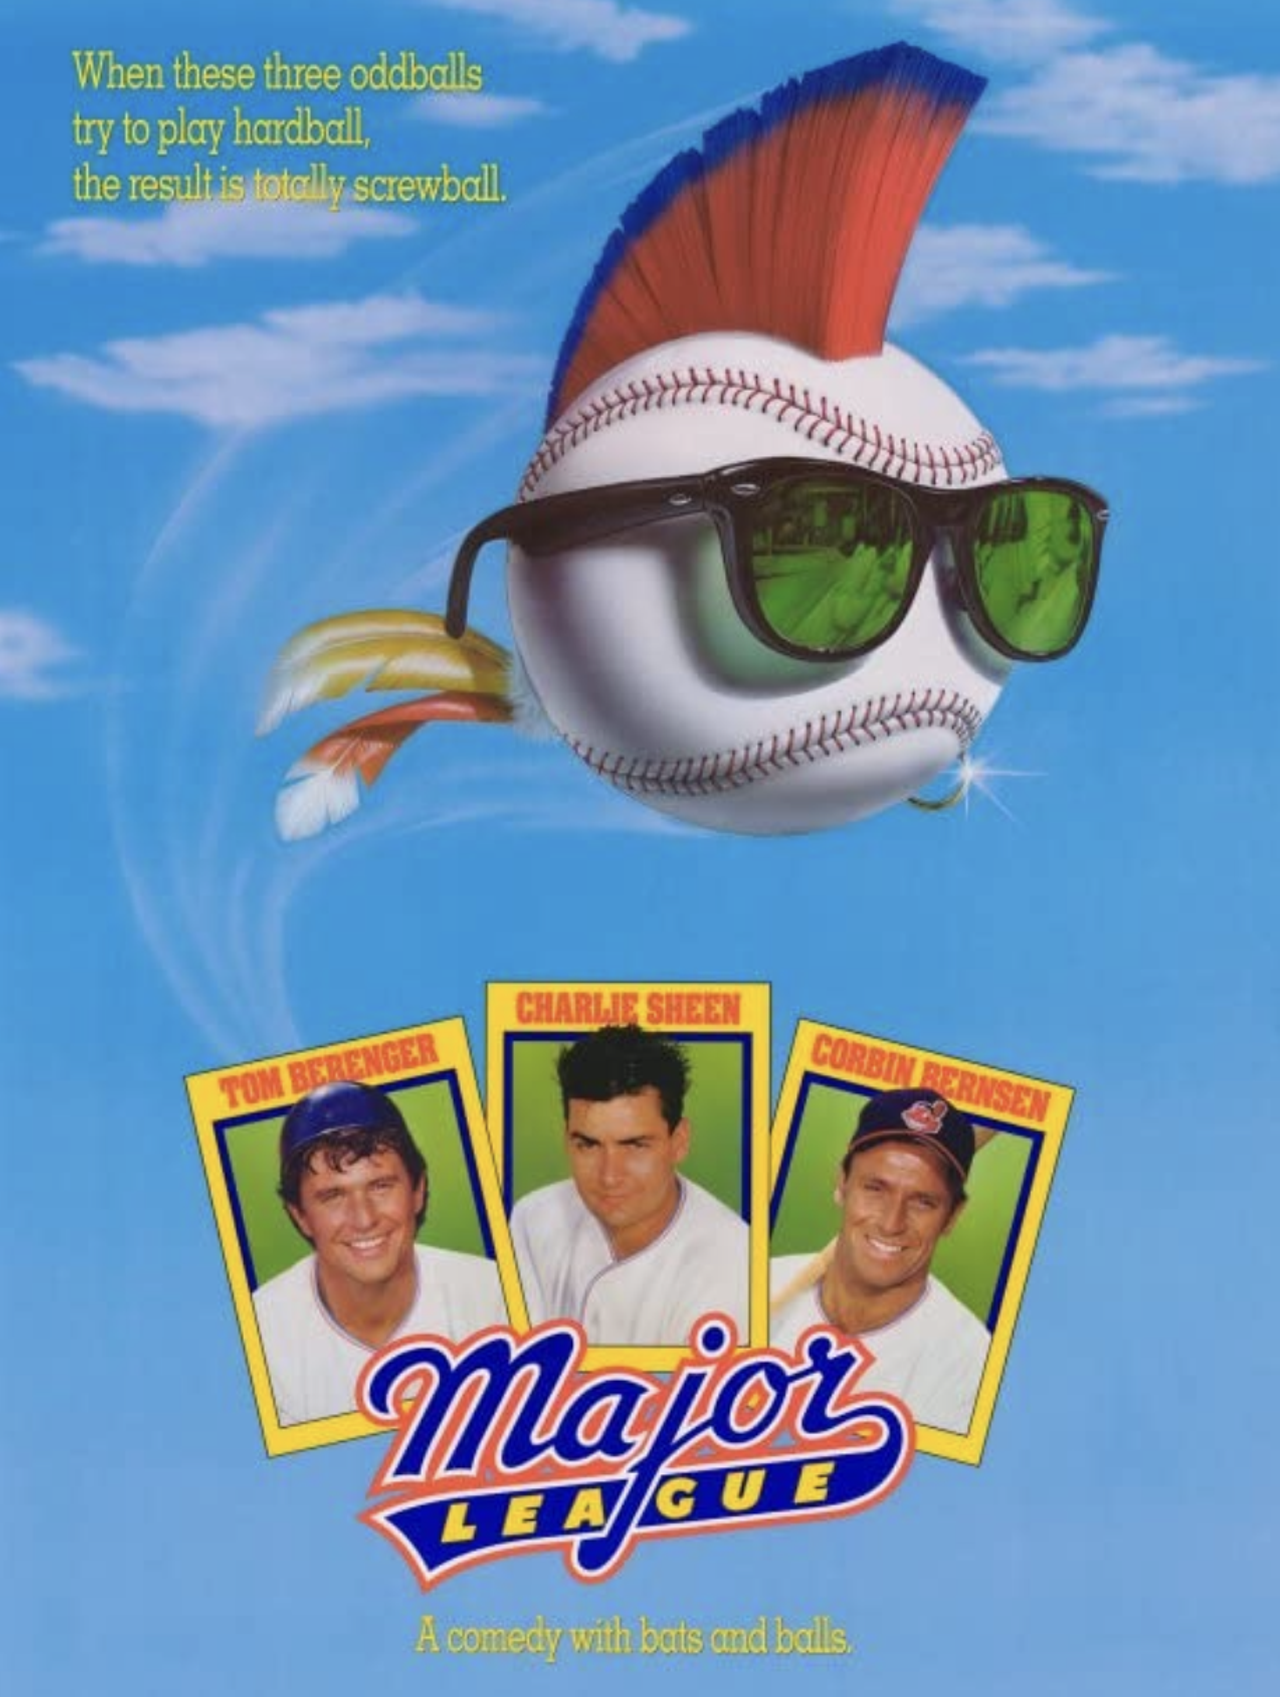 Major League  (1989) 
While this film was mostly made in Milwaukee and Arizona, it is clearly set in Cleveland. With the incompetence of the Indians organization as a backdrop, it's considered one of the best sports films of all time. The film is currently streaming on Paramount Plus, Hulu, and Showtime.